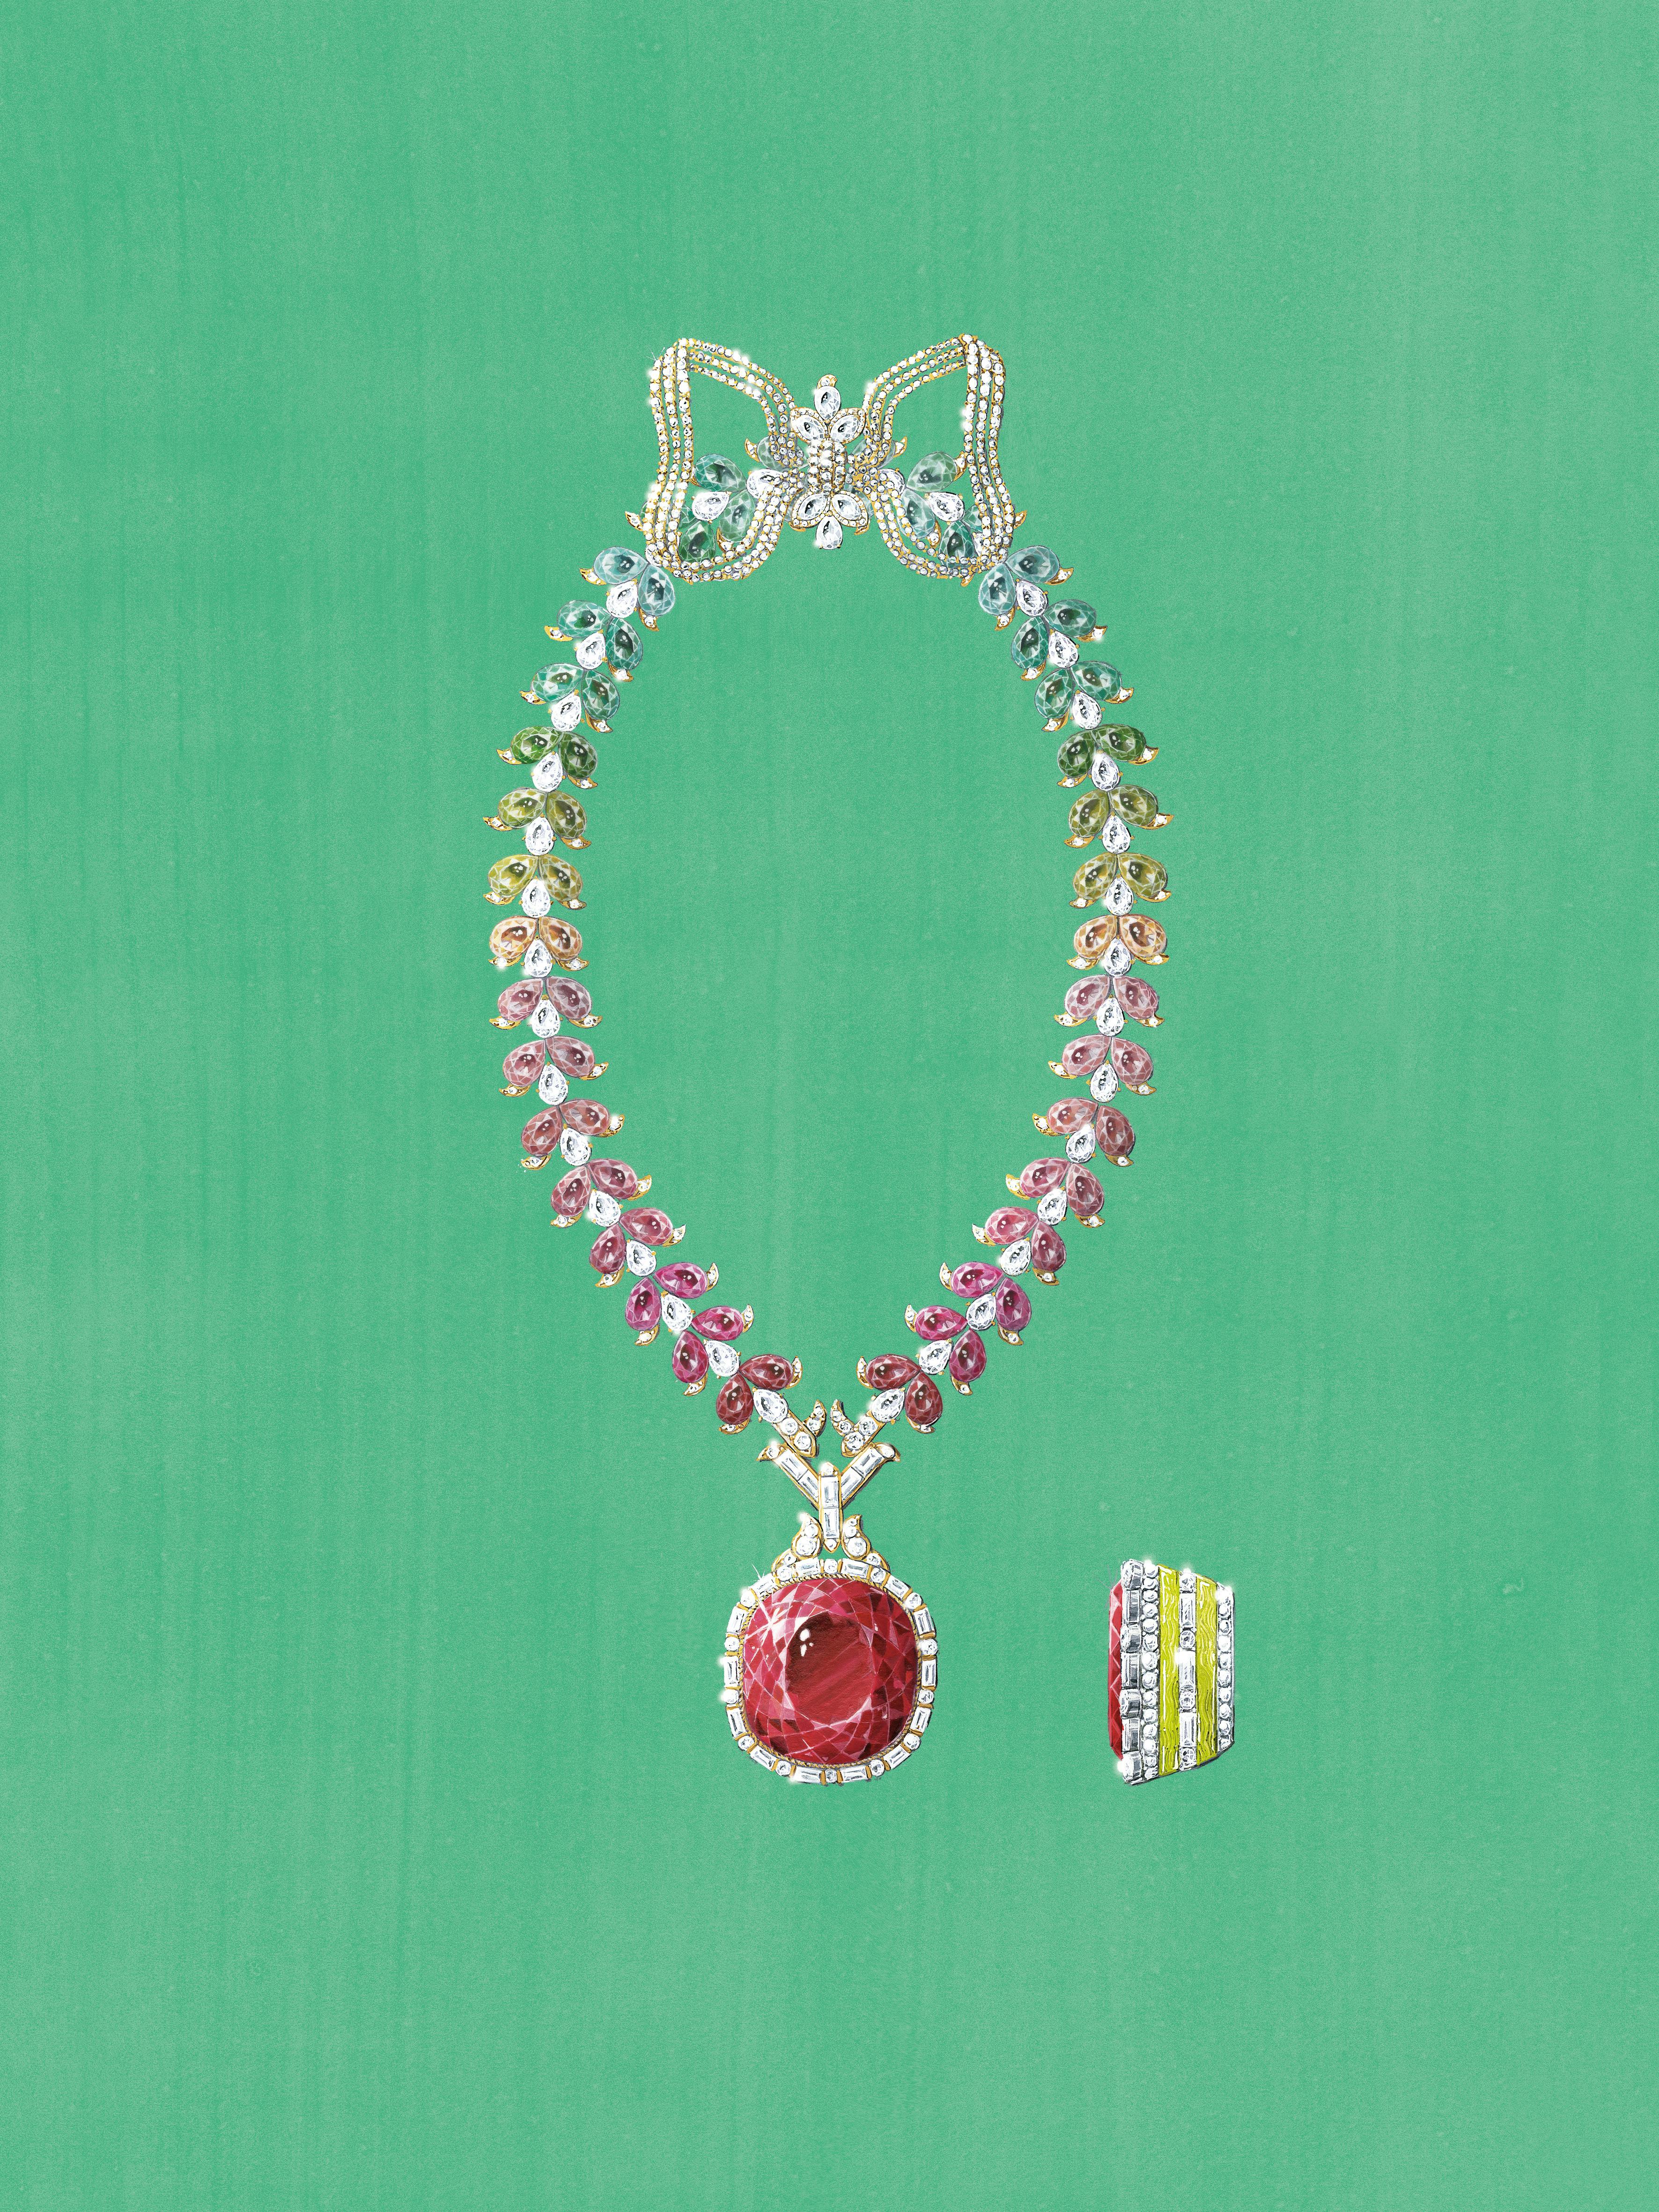 Gucci's Latest High Jewelry Collection Celebrates the Four Seasons